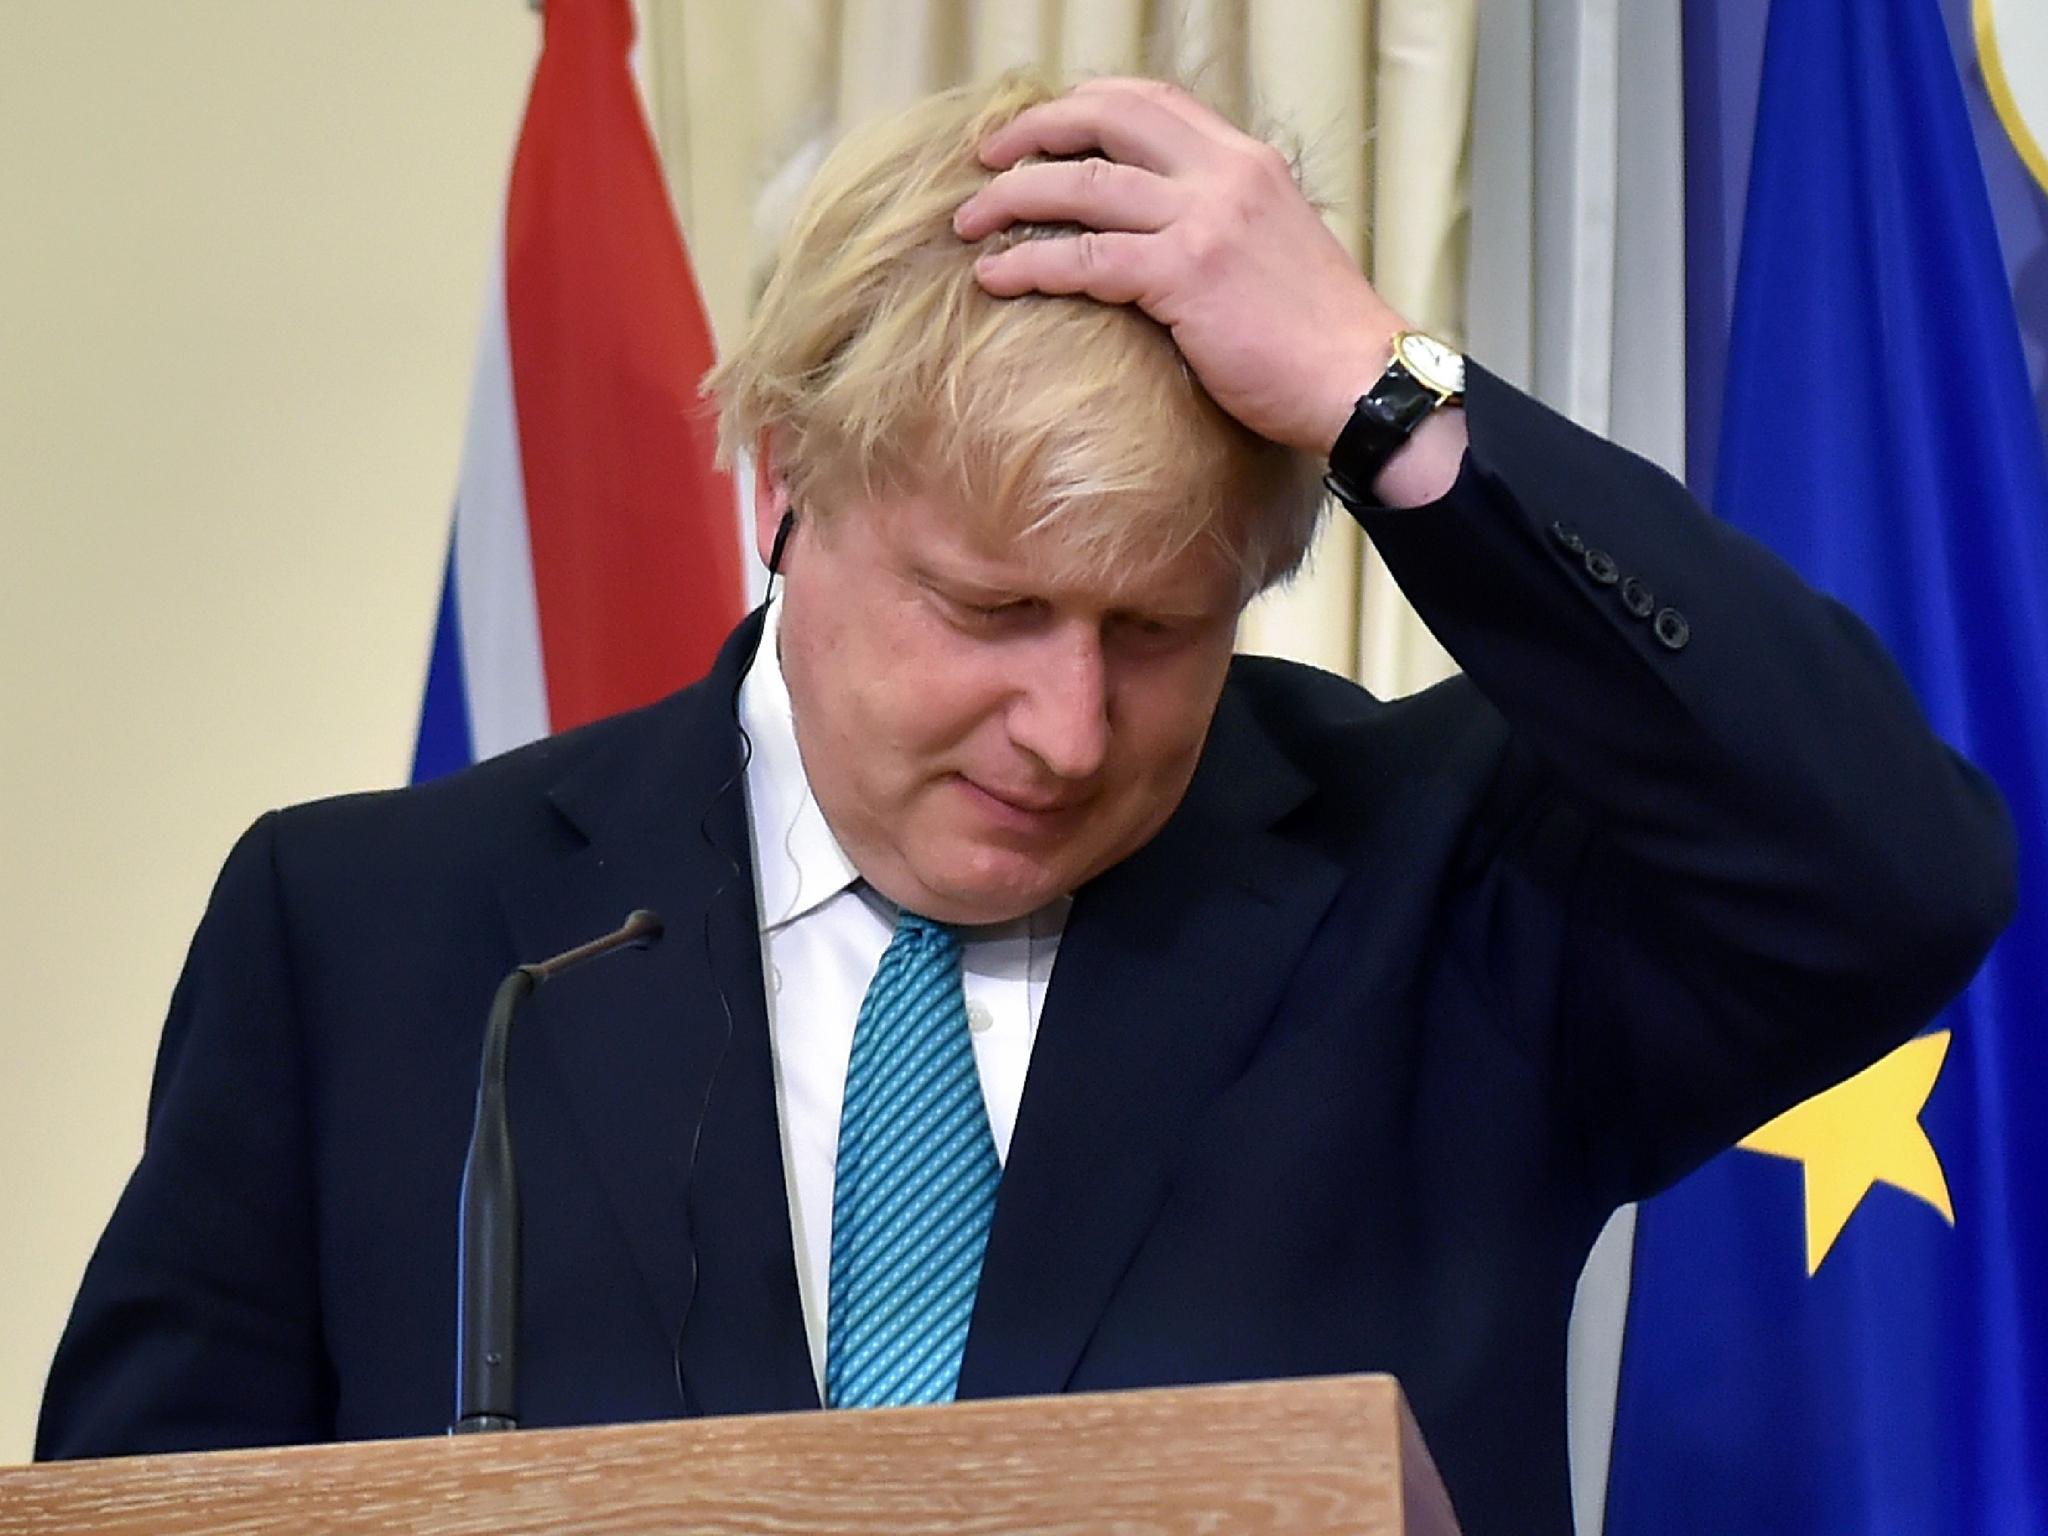 The Foreign Secretary was humiliated this week after G7 countries rejected his push for sanctions on Syria and Russia